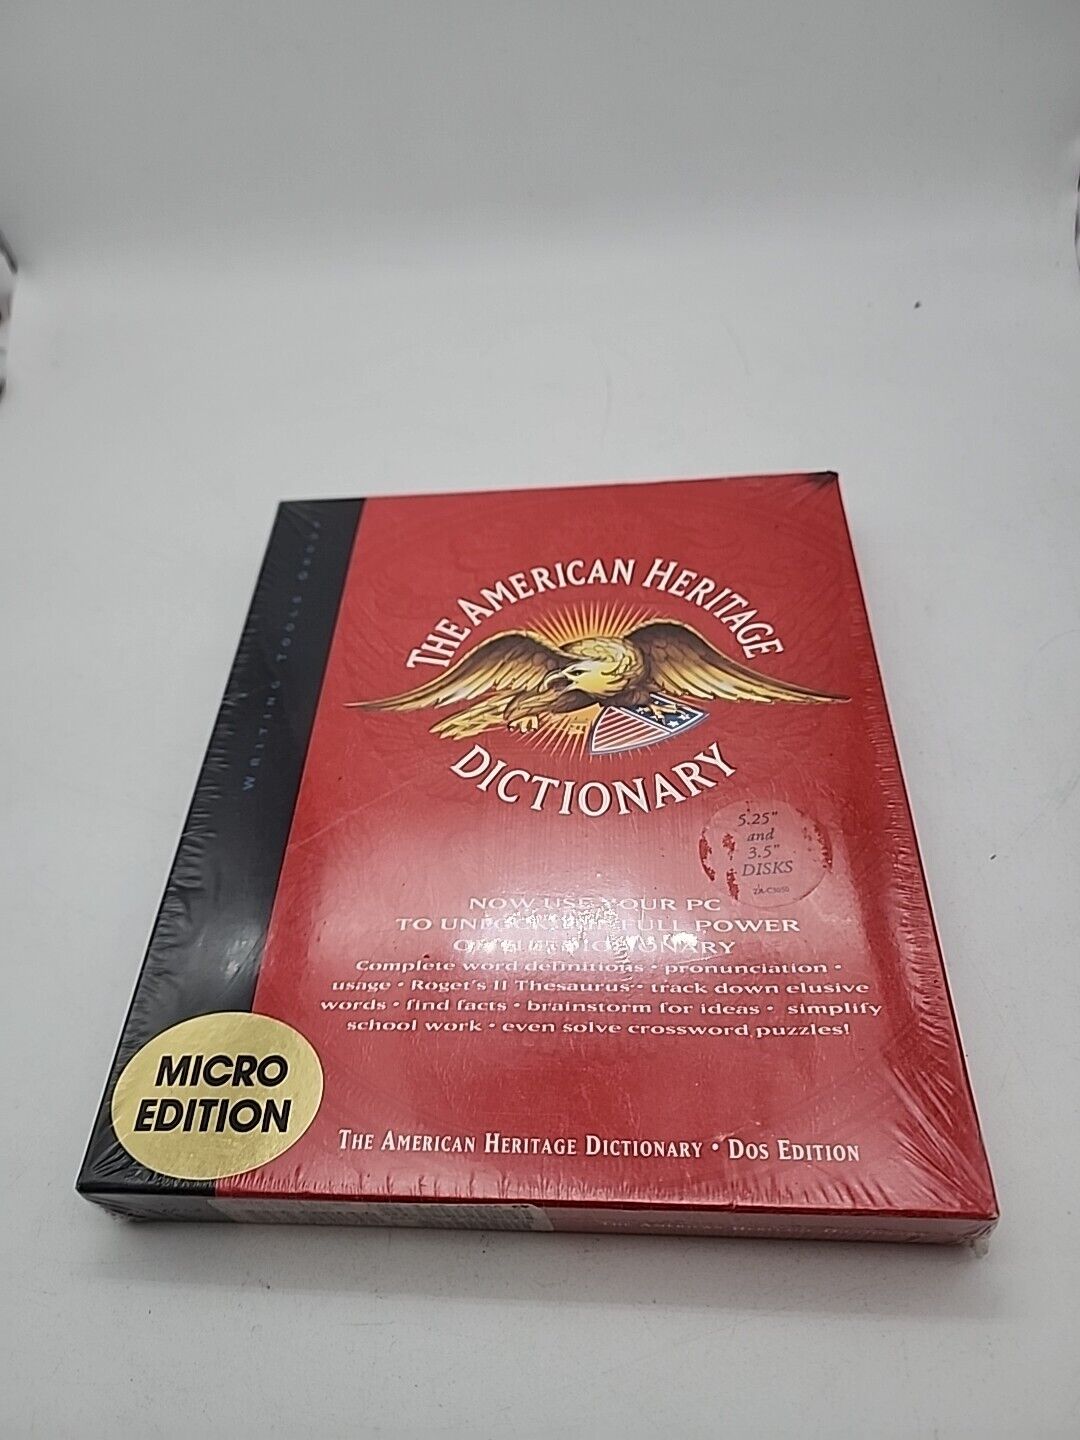 The American Heritage Dictionary PC Dos Edition Micro 5.25 and 3.5 disk - SEALED